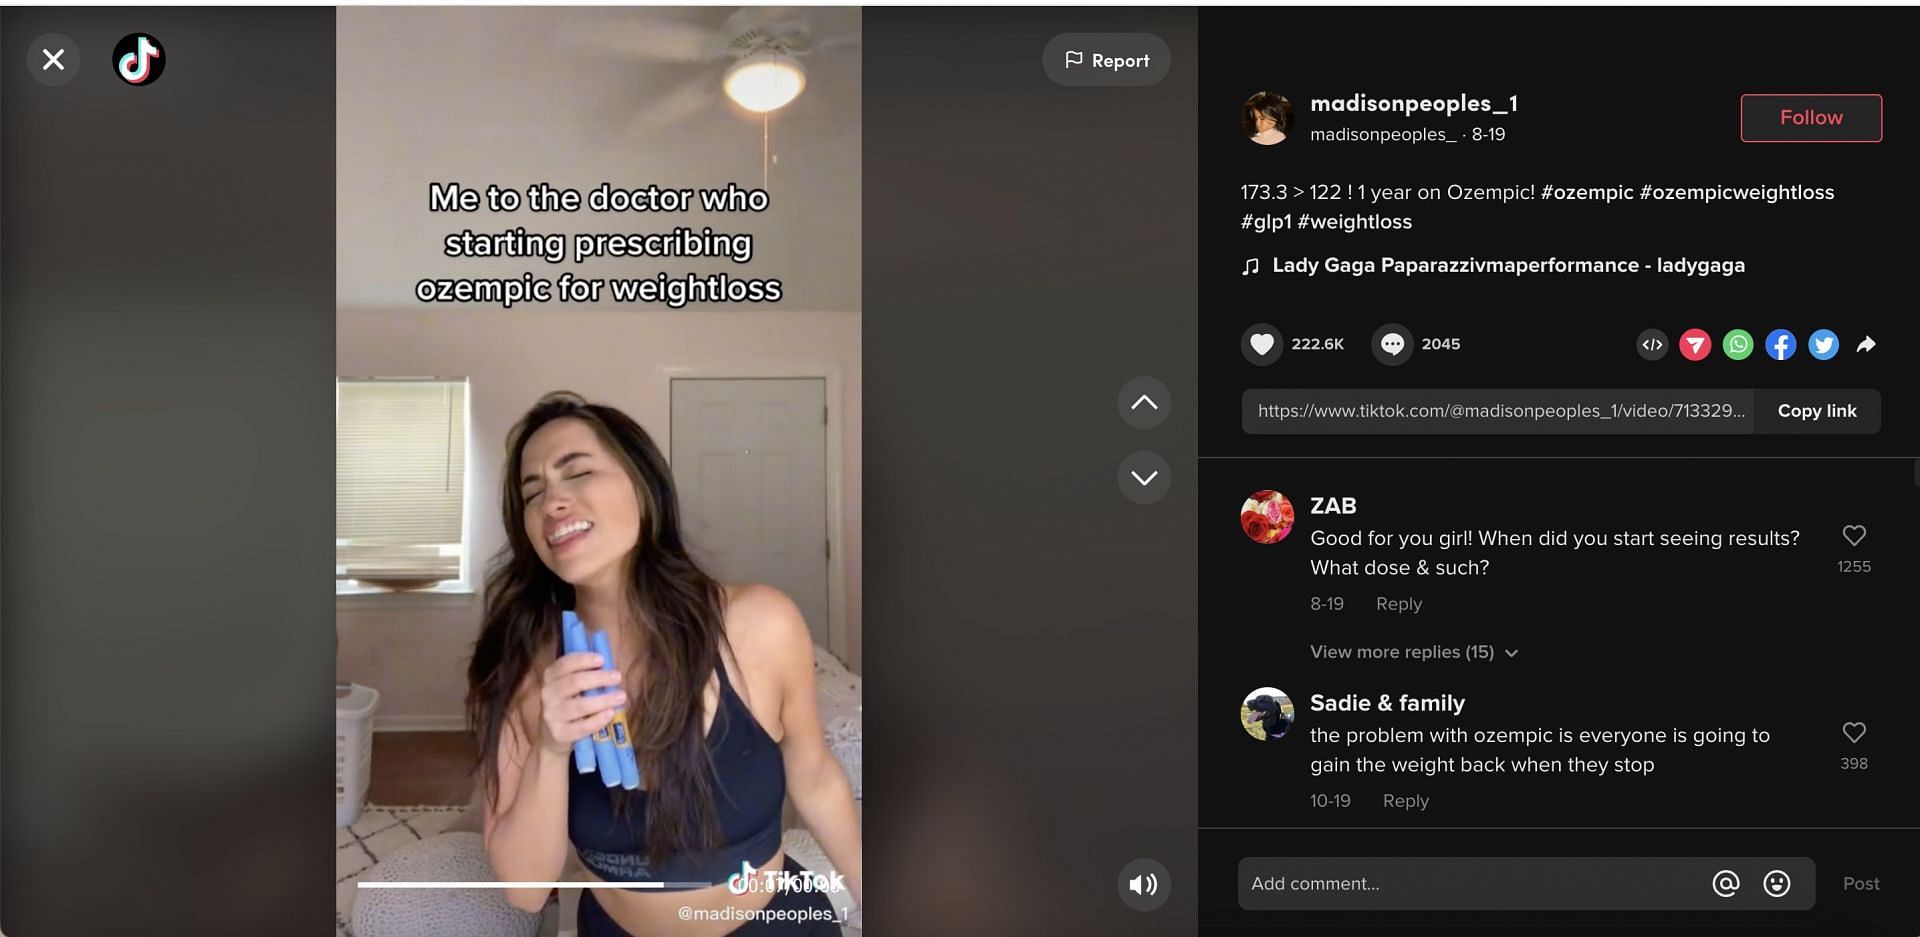 A user named Madison created a video claiming she lost many pounds by taking Ozempic shots for a year. (Image via TikTok)